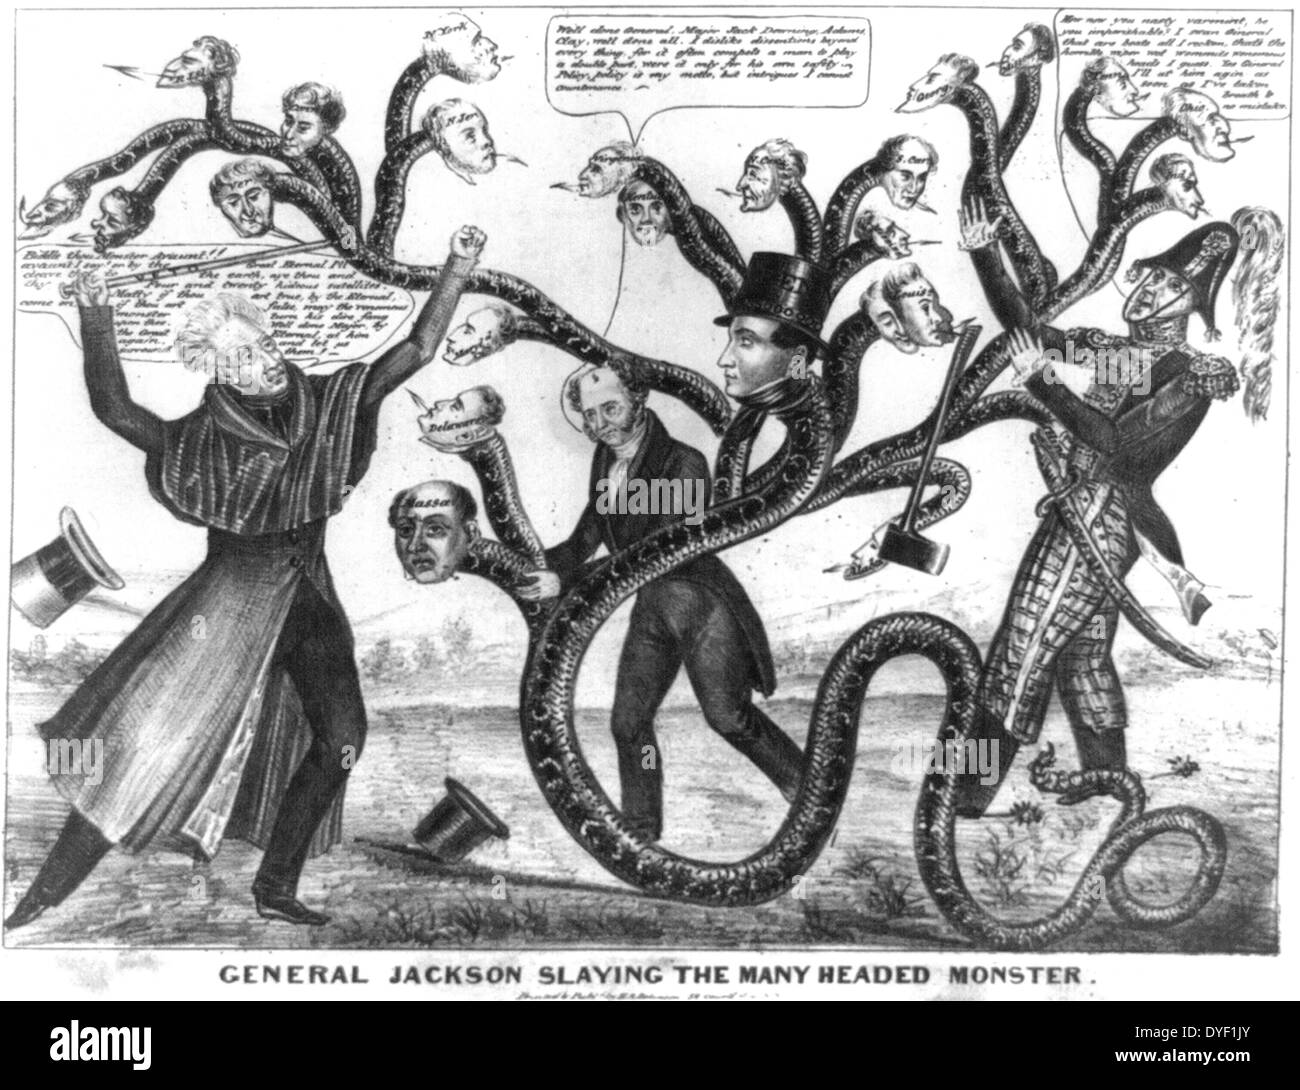 General Jackson slaying the many headed monster a political cartoon by Henry R. Robinson circa 1836. Lithograph print on wove paper. Satirising Andrew Jackson's campaign to destroy the Bank of the U.S. and its state bank support. Showing Jackson, VP Van Buren and Jack Downing fighting a many headed snake. Stock Photo